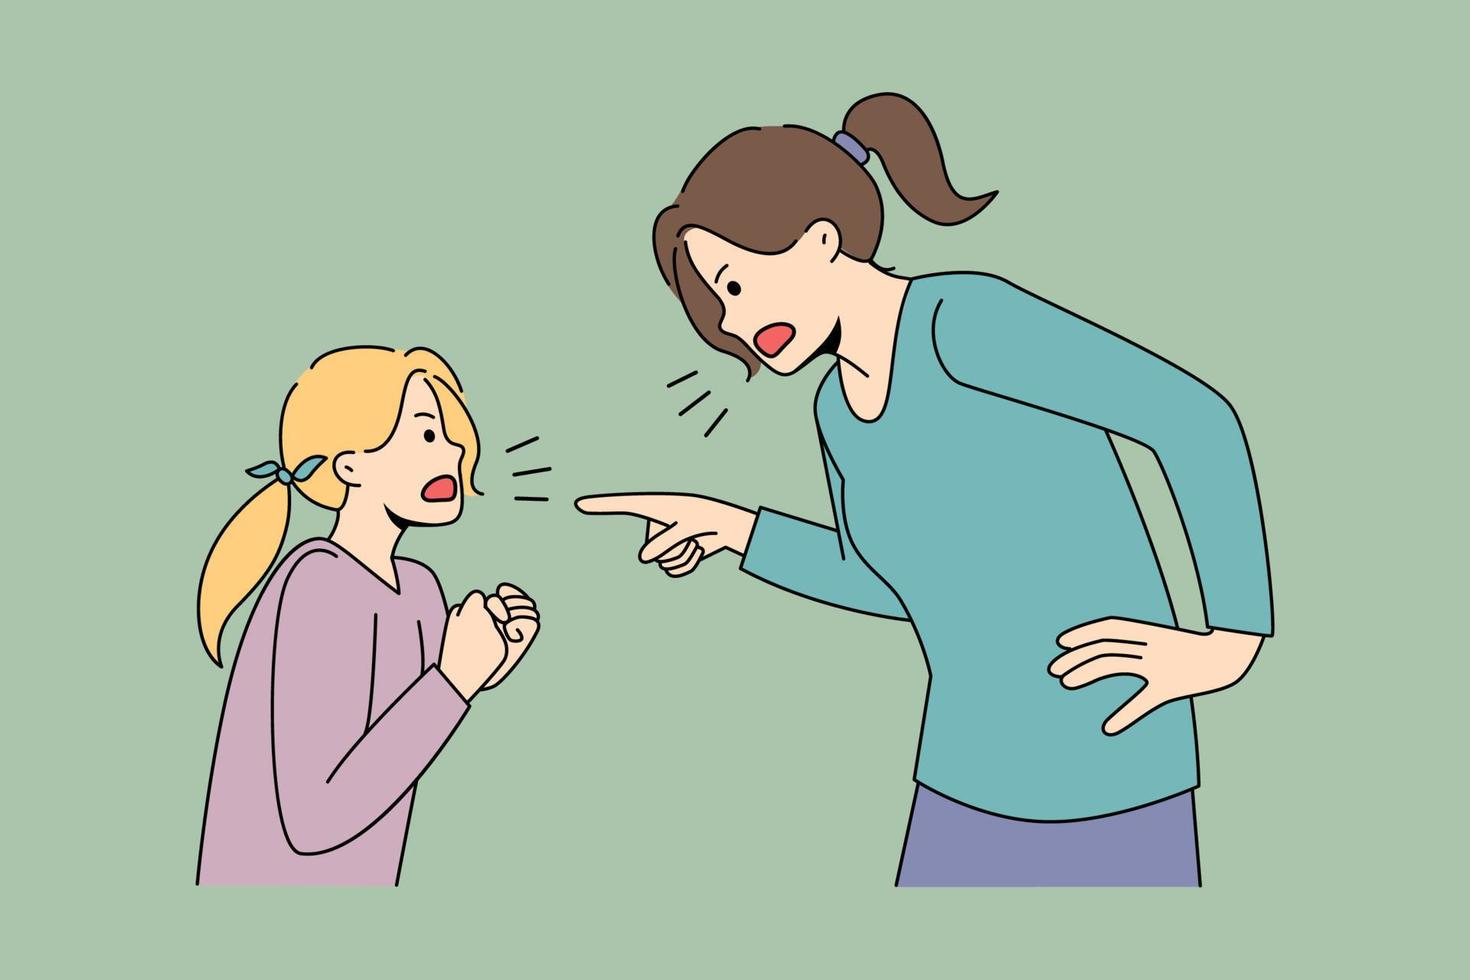 Angry authoritarian mom and naughty small daughter scream fight. Mad mother lecture scold ill-behaved girl child, shouting and yelling. Domestic violence concept. Vector illustration.